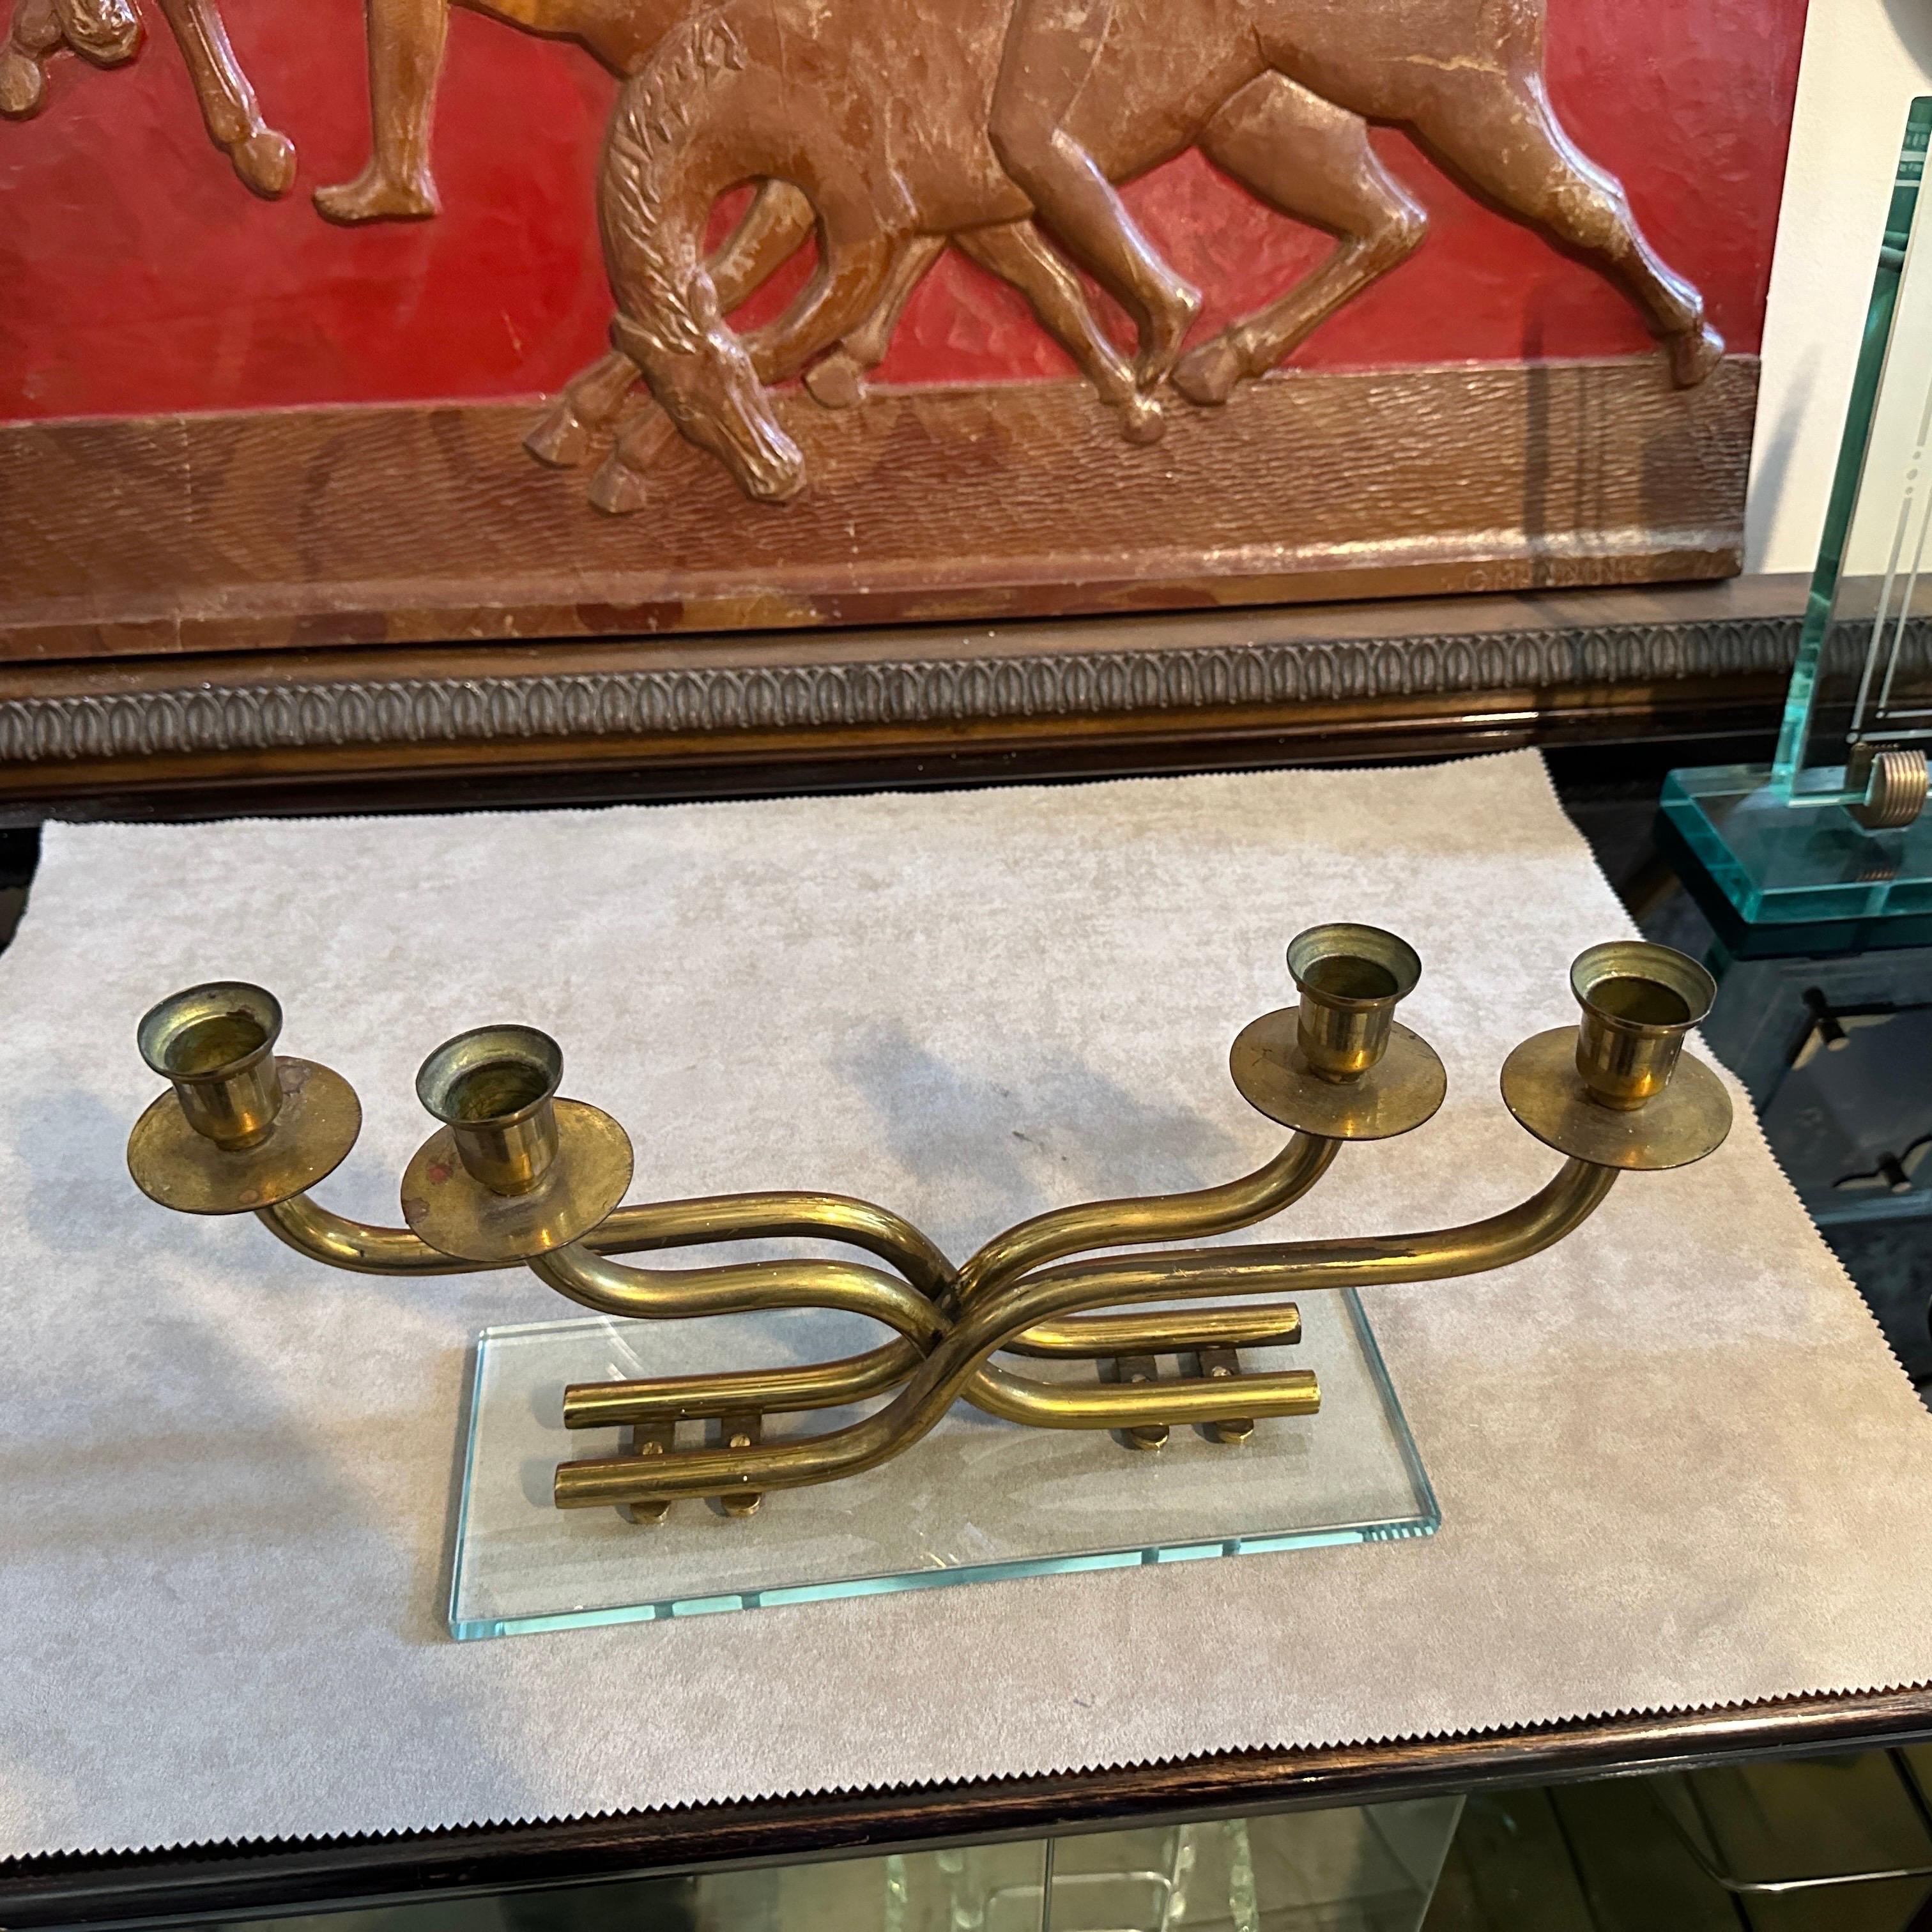 A mid-century Modern candelabra designed and manufactured in Italy in the manner of Fontana Arte, brass it's in original patina, glass it's in perfect condition. This Italian candelabra serves as a captivating centerpiece, casting a warm, inviting